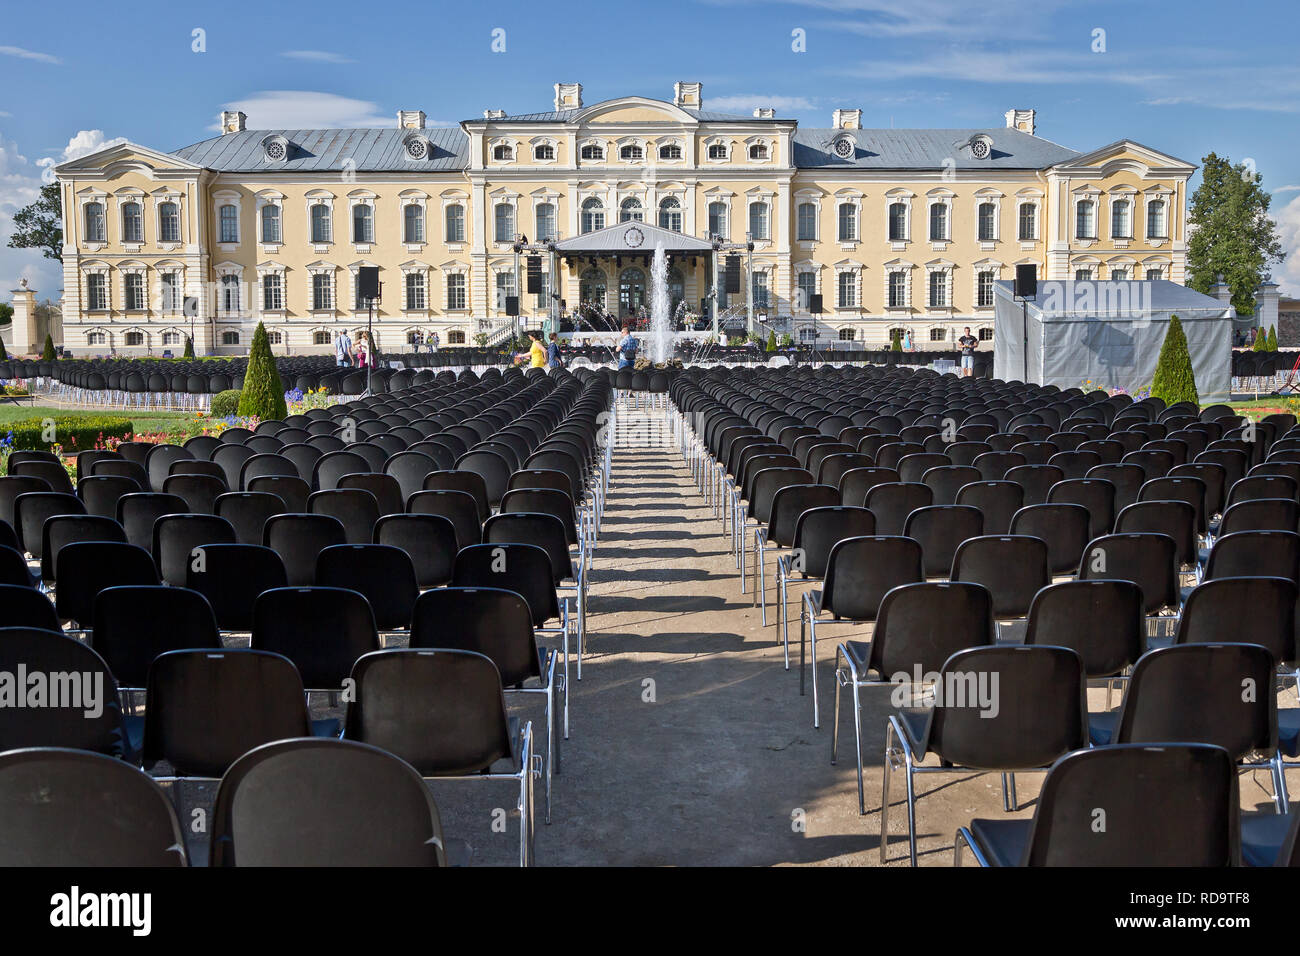 Rundales palace prepared for classical music concert, Latvia Stock Photo